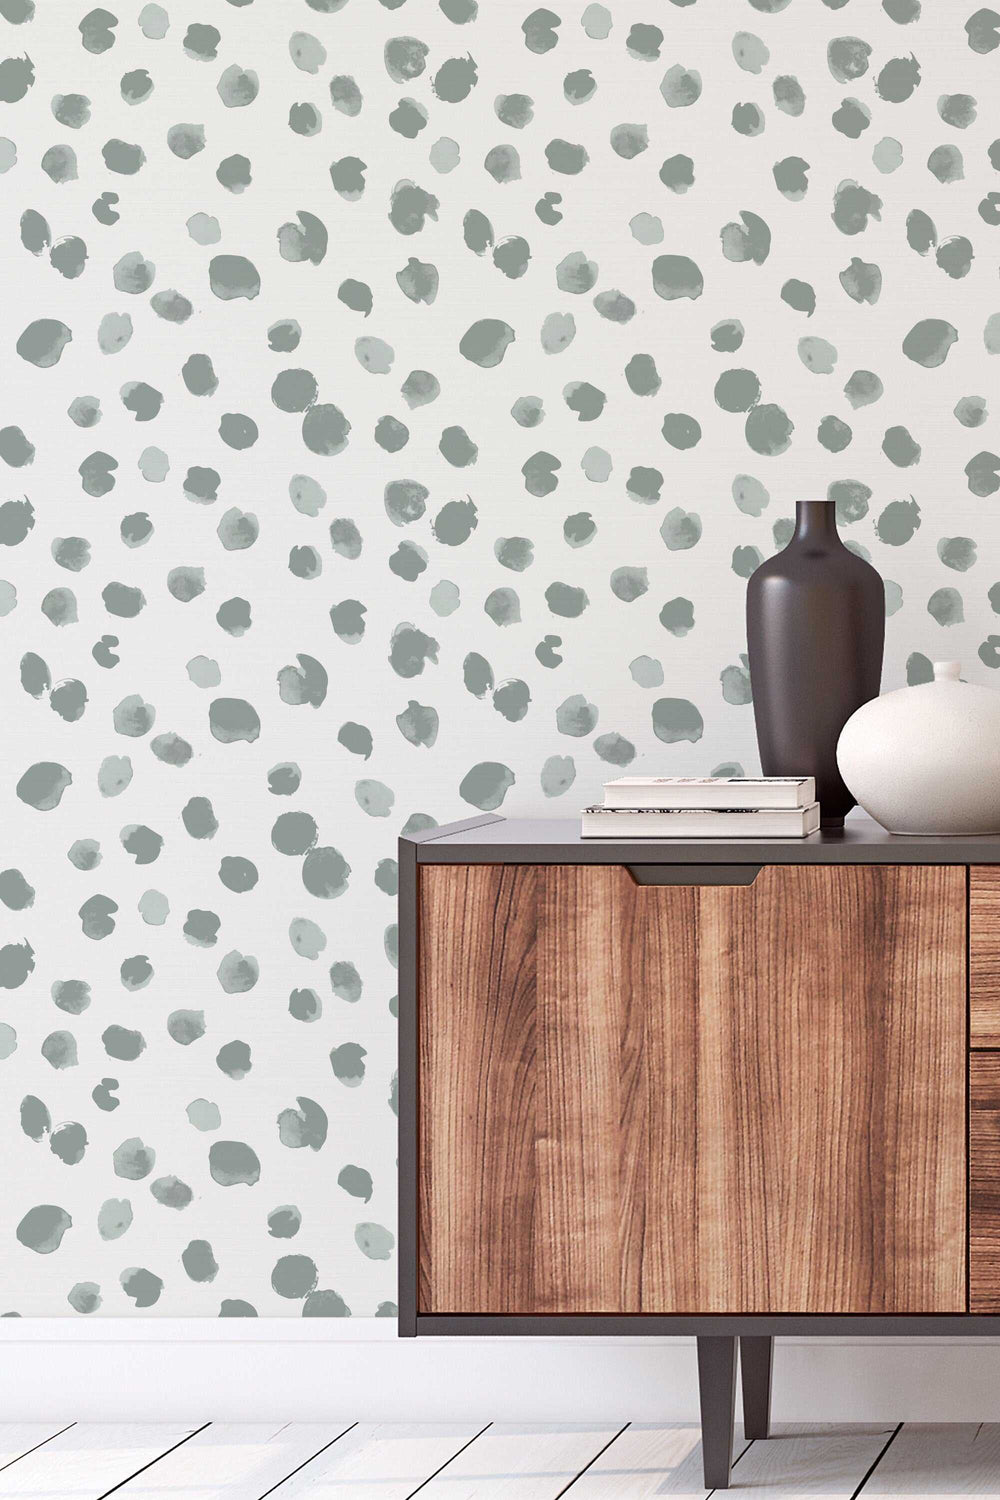 Watercolor gray dots on white Hand made pattern wallpaper - removable wallpaper - peel and stick #3044